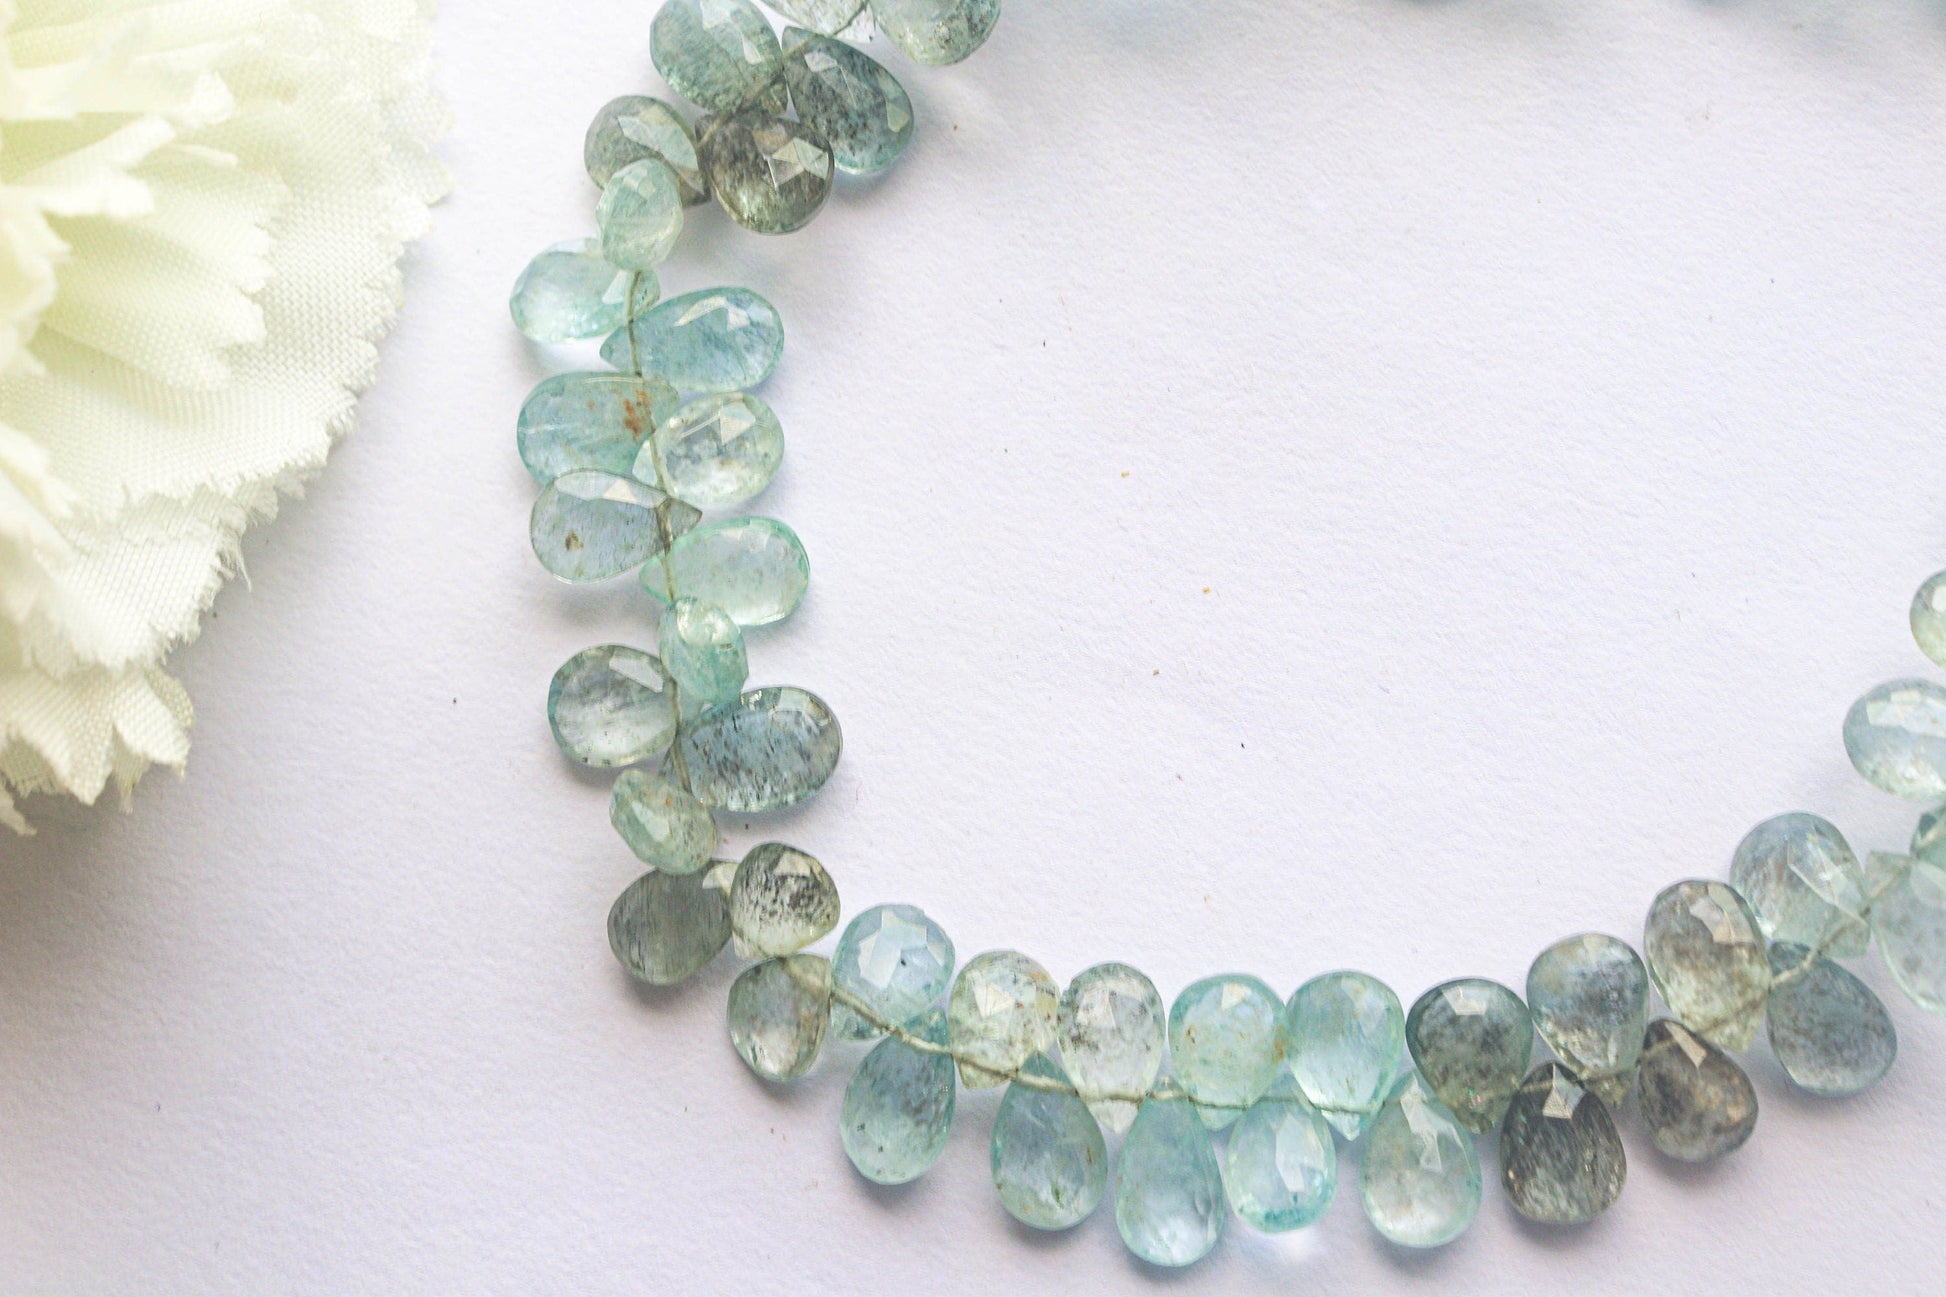 Moss Aquamarine Faceted Pear Shape Briolette | 6x8mm | 72 Pieces Full Strand | 9 Inch | Natural Moss Aquamarine | Beadsforyourjewellery Beadsforyourjewelry